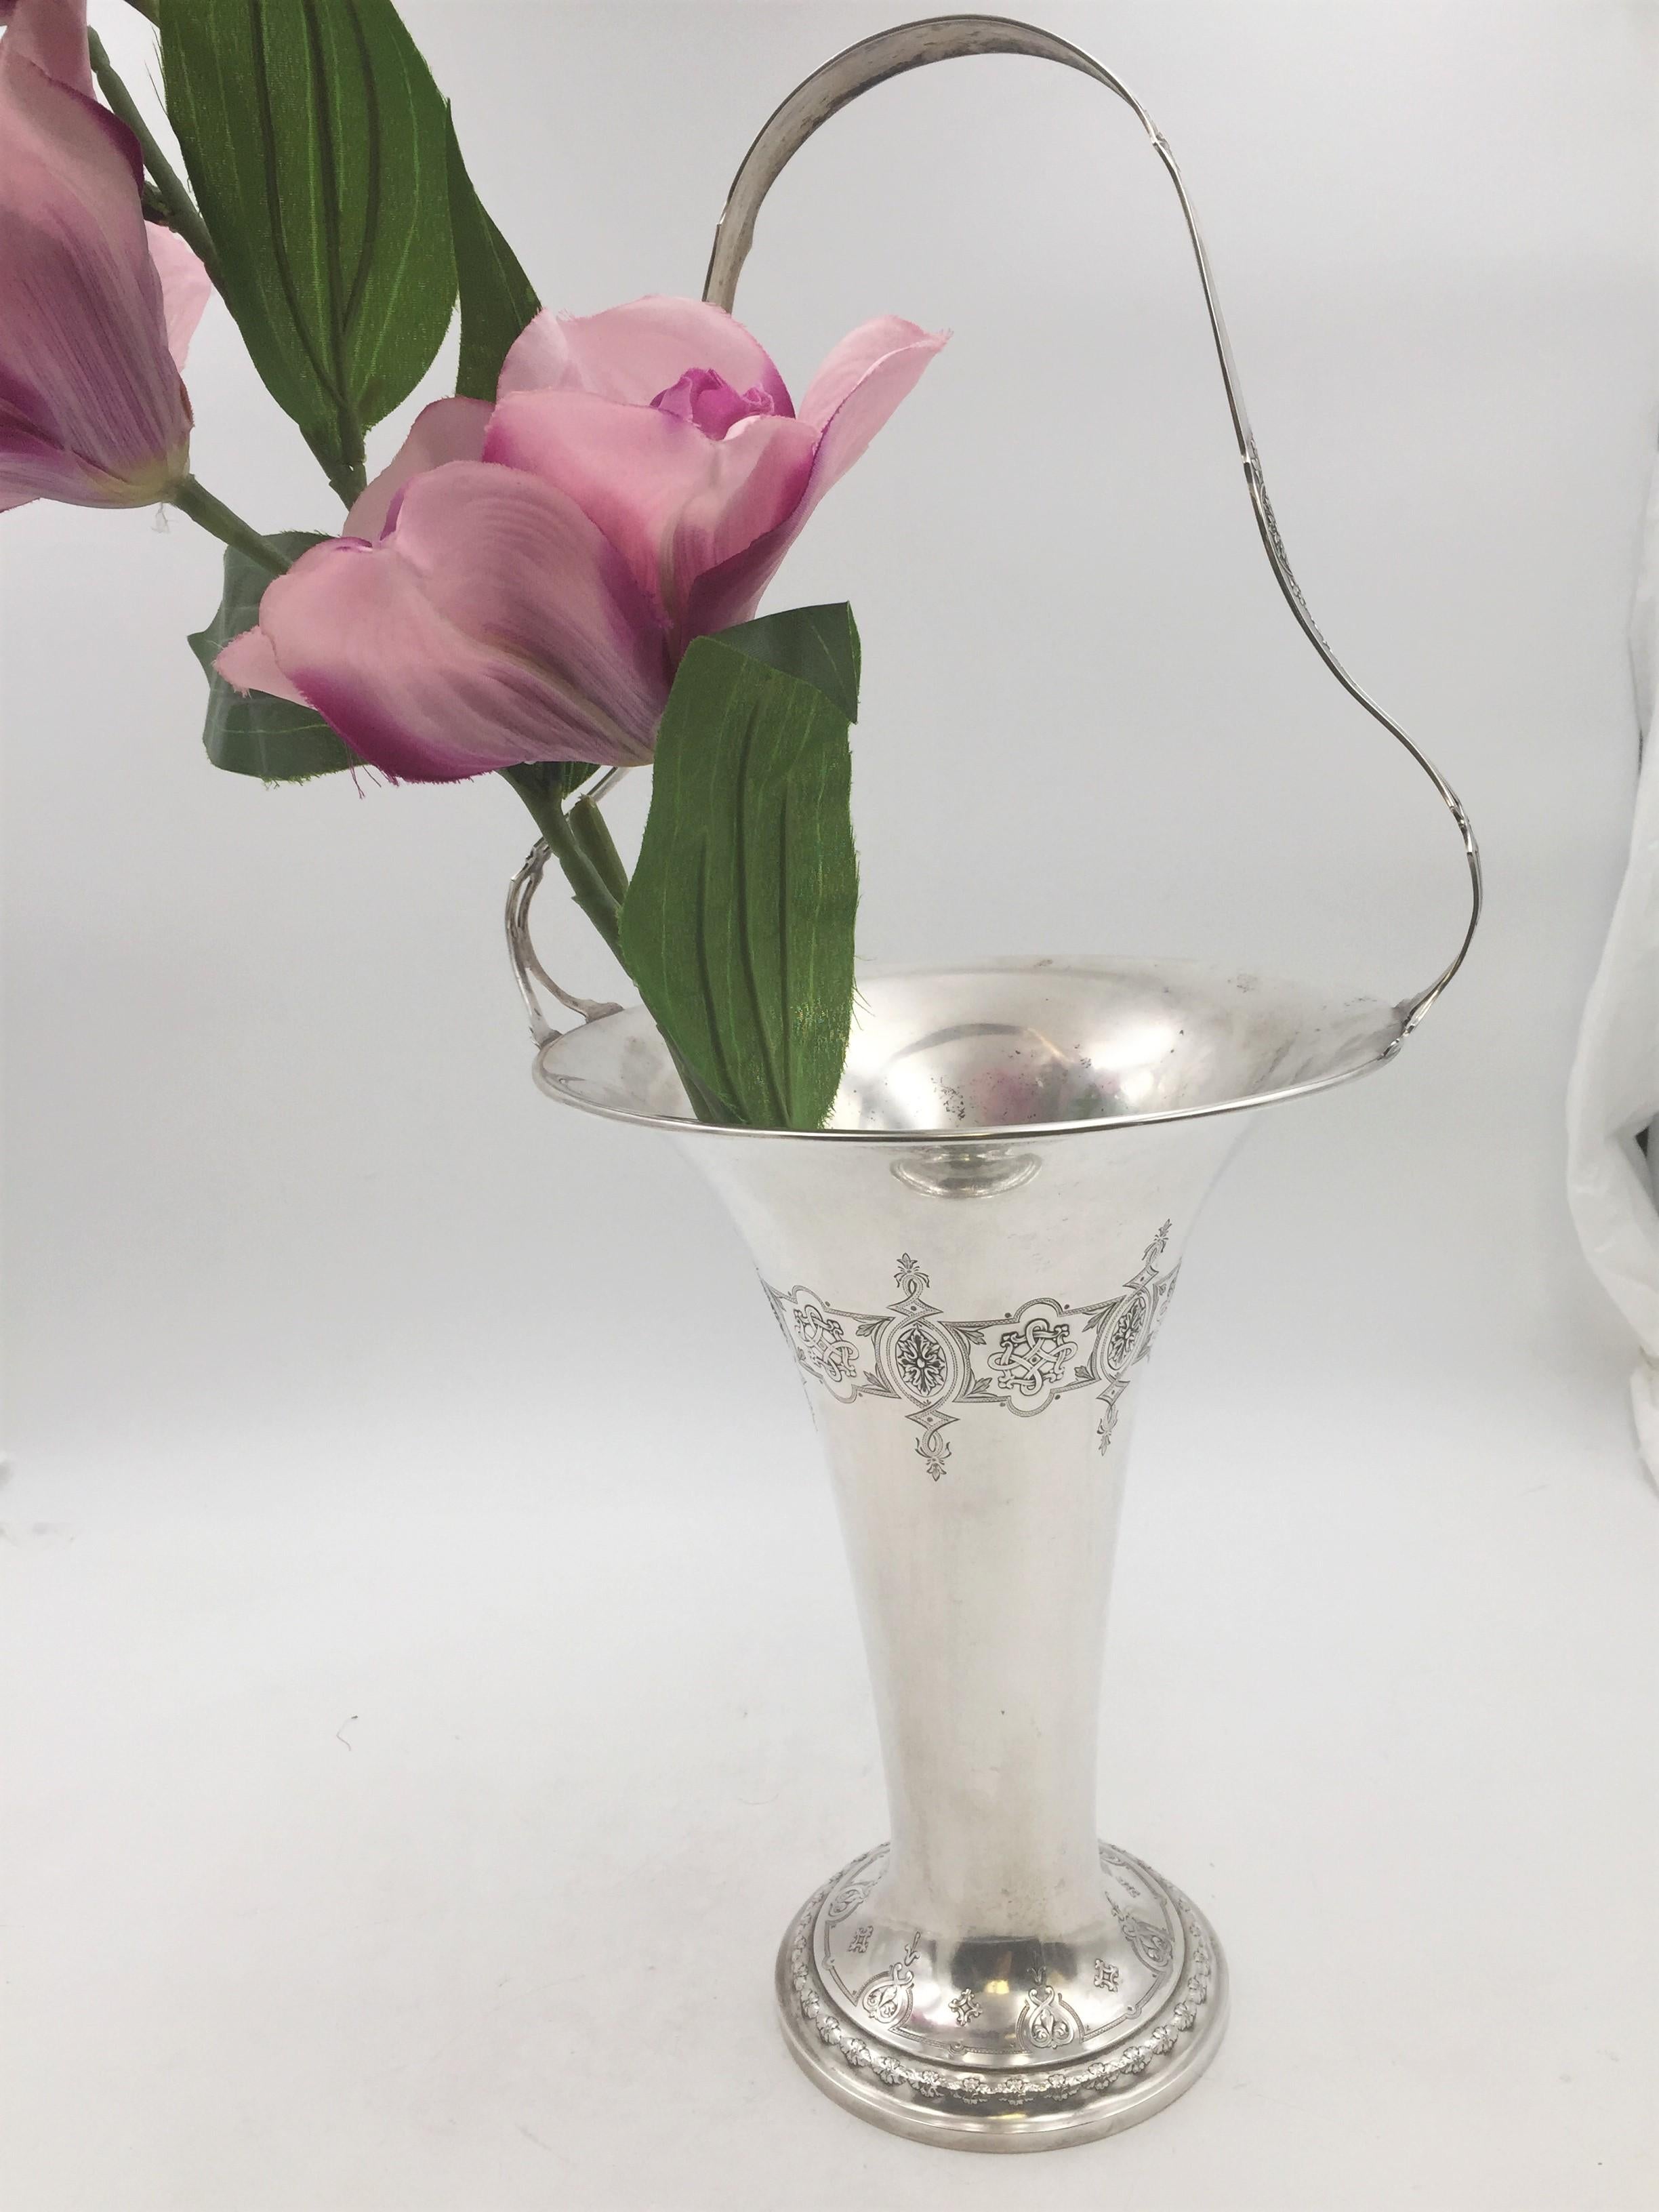 Late 19th or early 20th century Whiting sterling silver vase with handle or pedestal basket with ornate, stylized, natural and geometric patterns on the handle, around the body, and around the base. It measures 19 3/4'' in height (including the